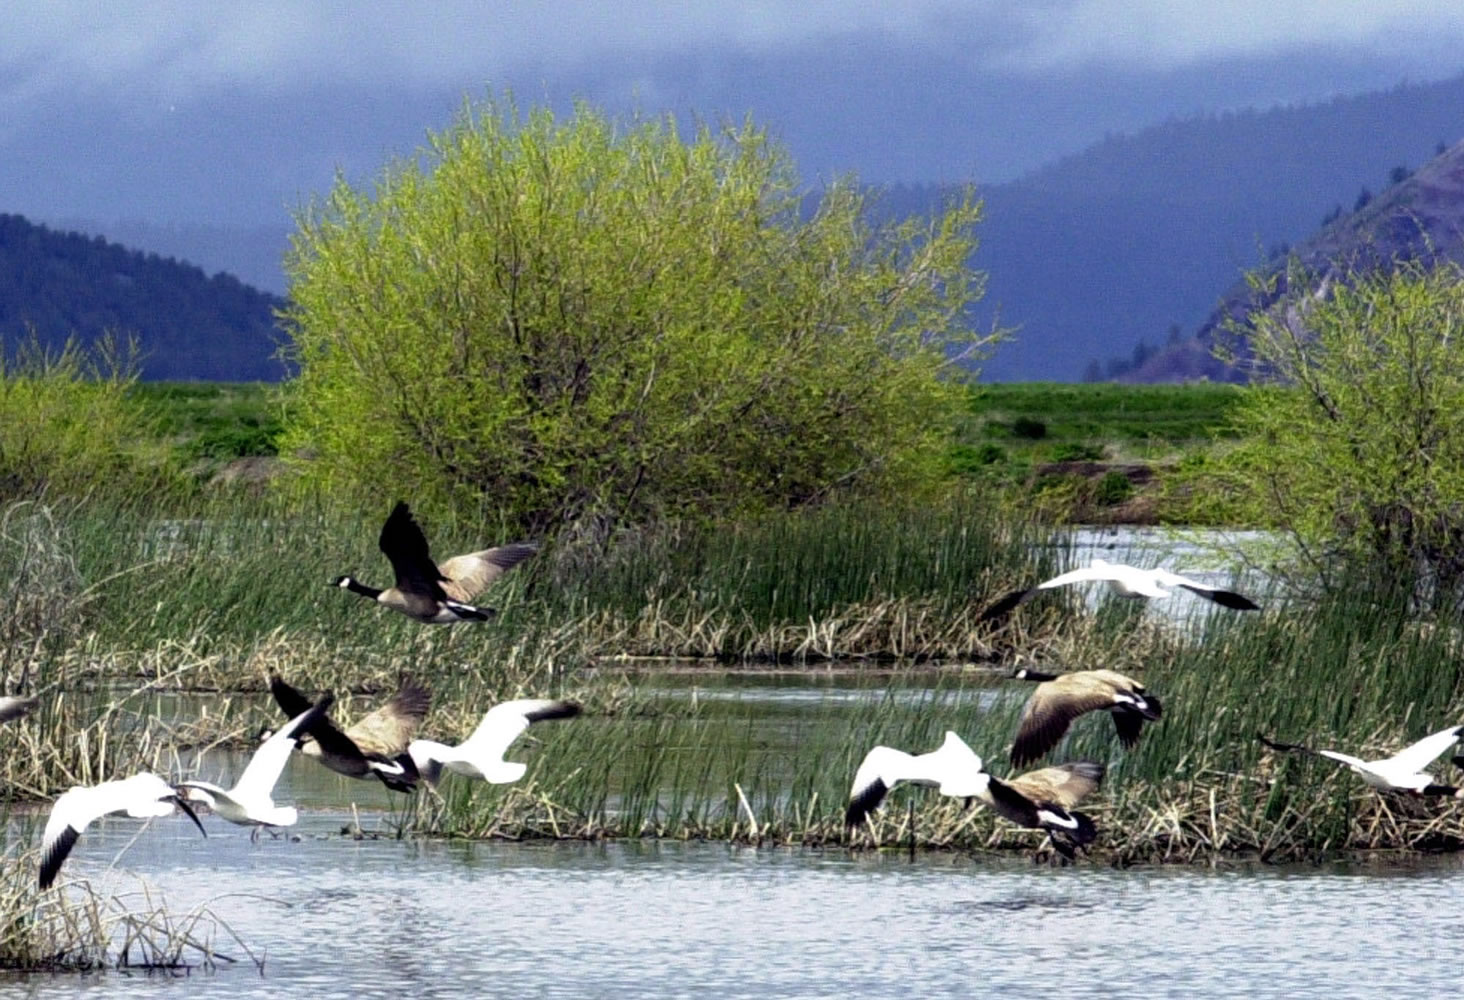 Snow geese and Canada geese prepare to land on marsh at the Lower Klamath National Wildlife Refuge near Merrill, Ore.